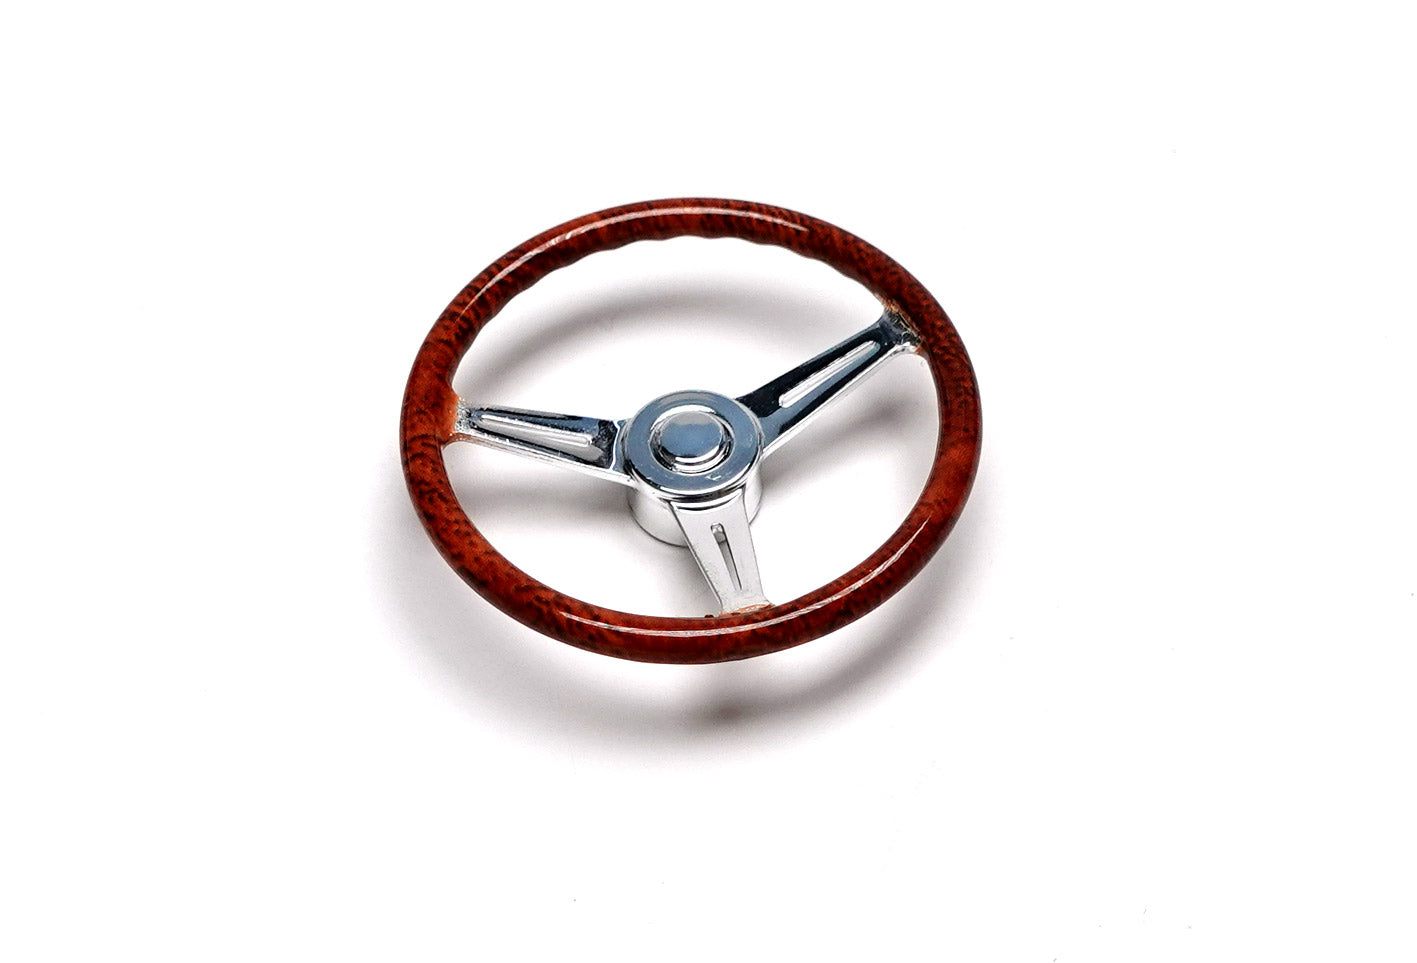 Nardi style 1/10 scale Steering Wheel Gold or Chrome